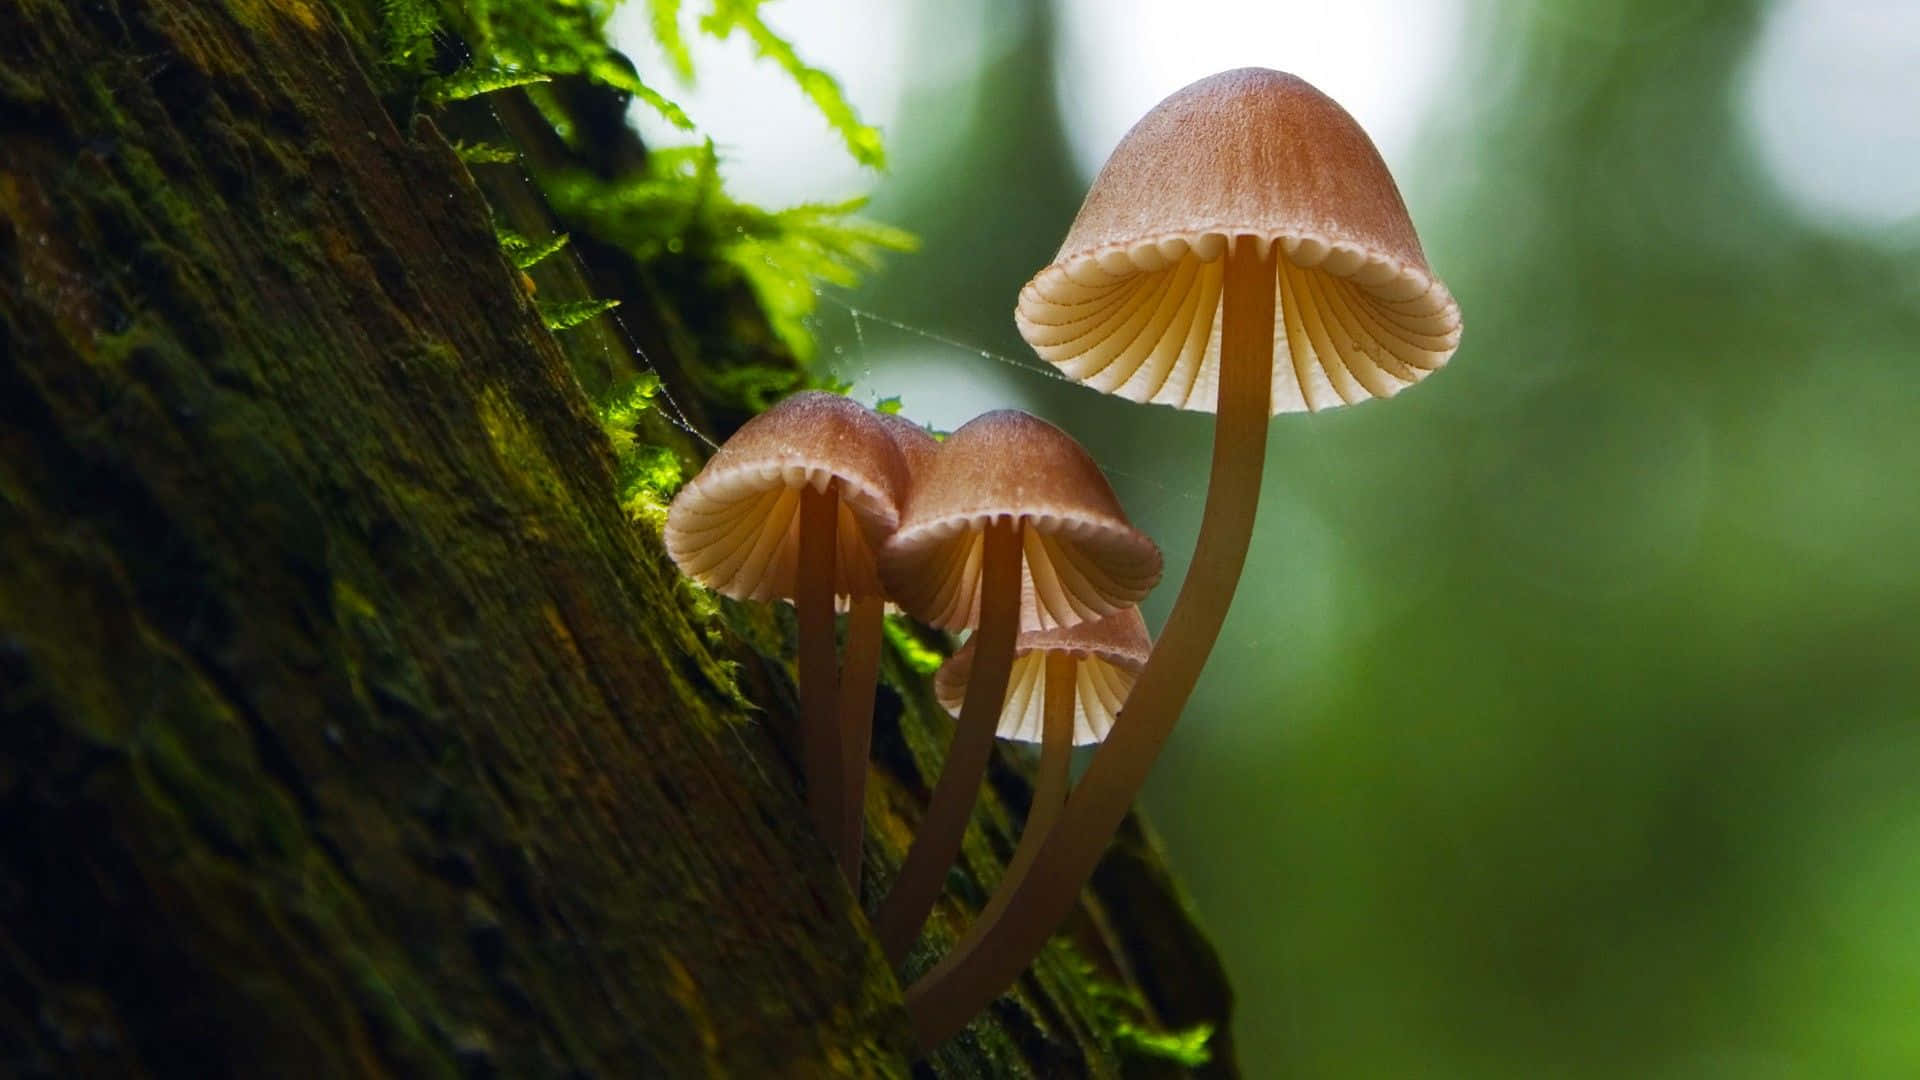 Magical Fairytale Mushroom in a Microcosm of Nature